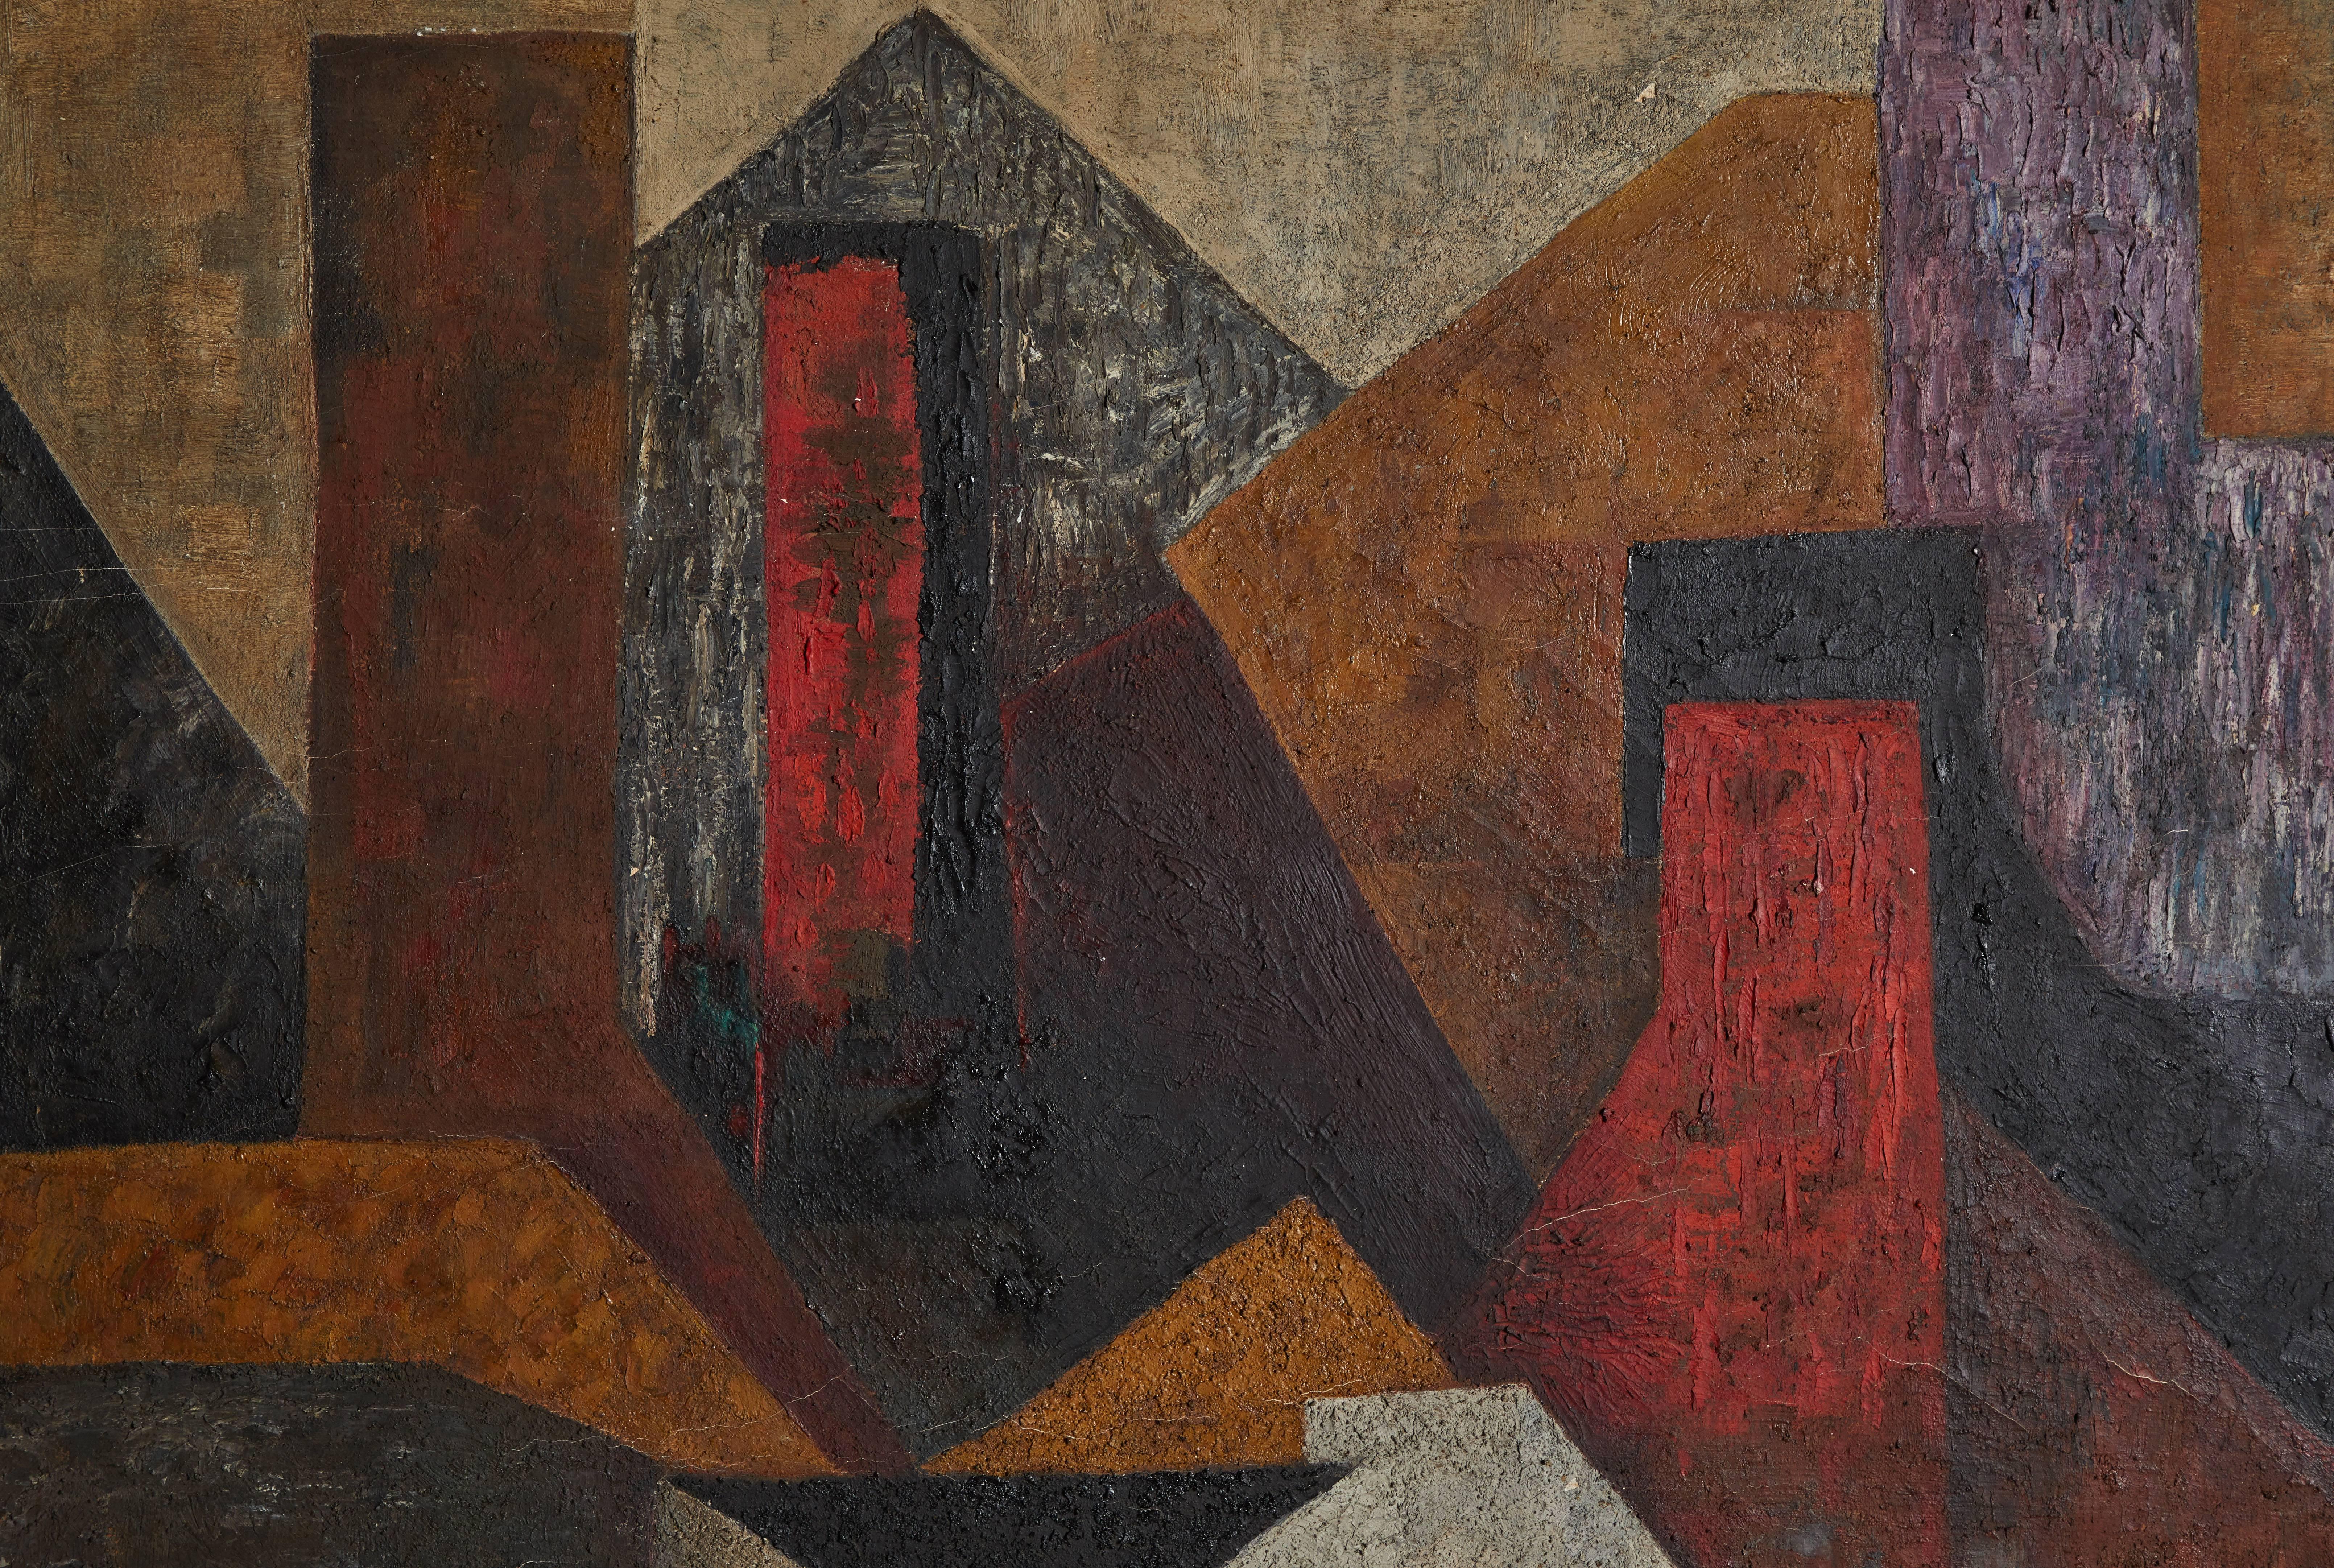 Abstract framed geometric oil on canvas signed by Mexican artist, Luis García Guerrero. Made in Mexico circa 1950s.